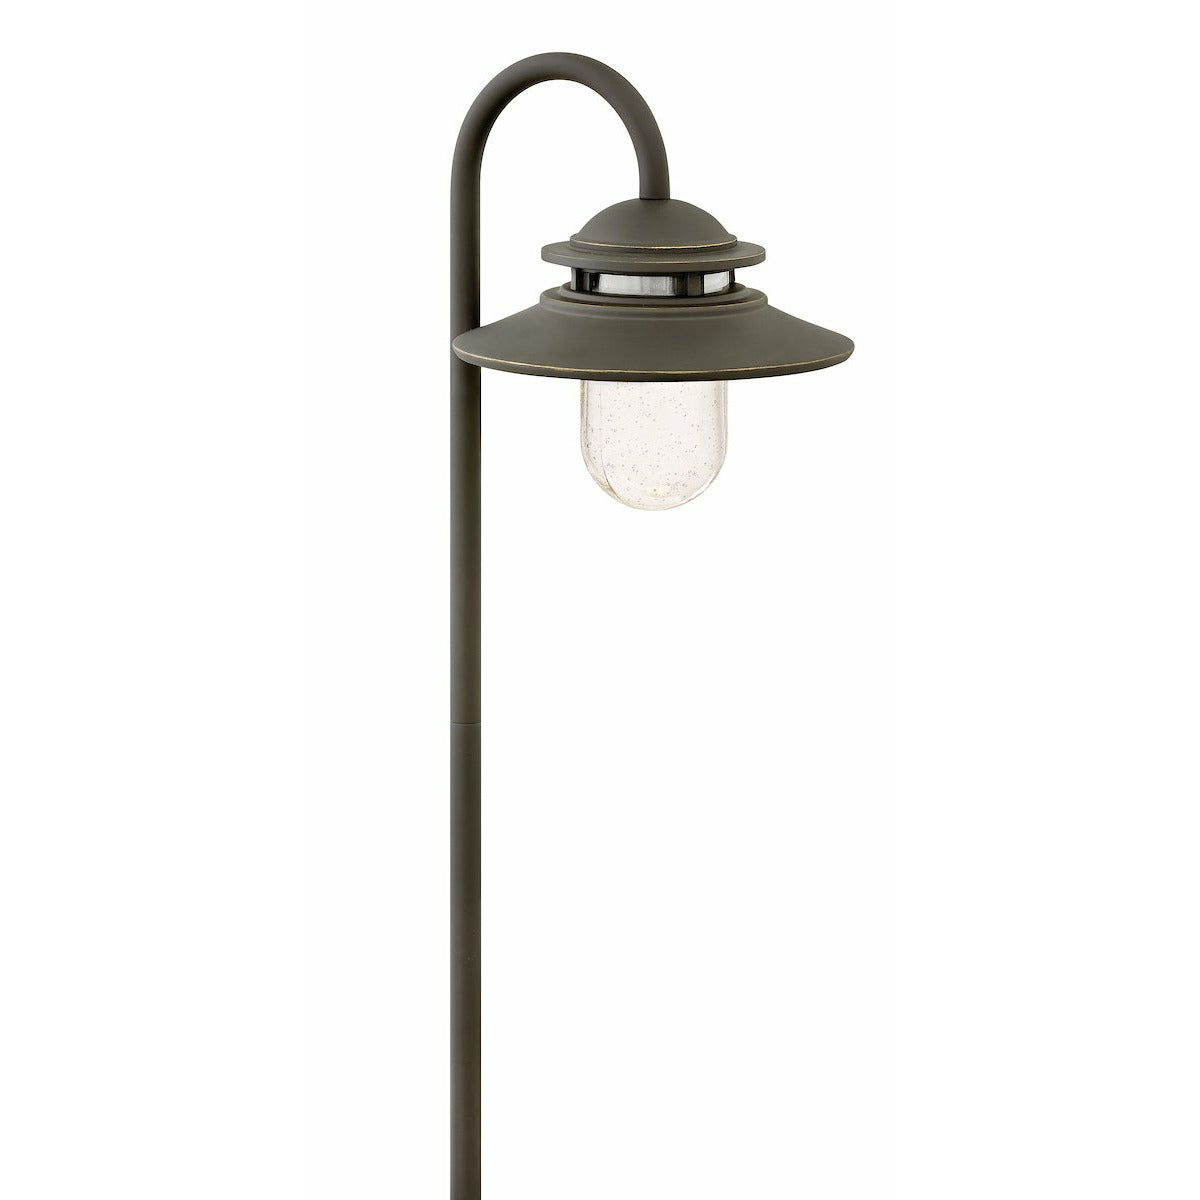 Atwell Landscape Lighting Oil Rubbed Bronze